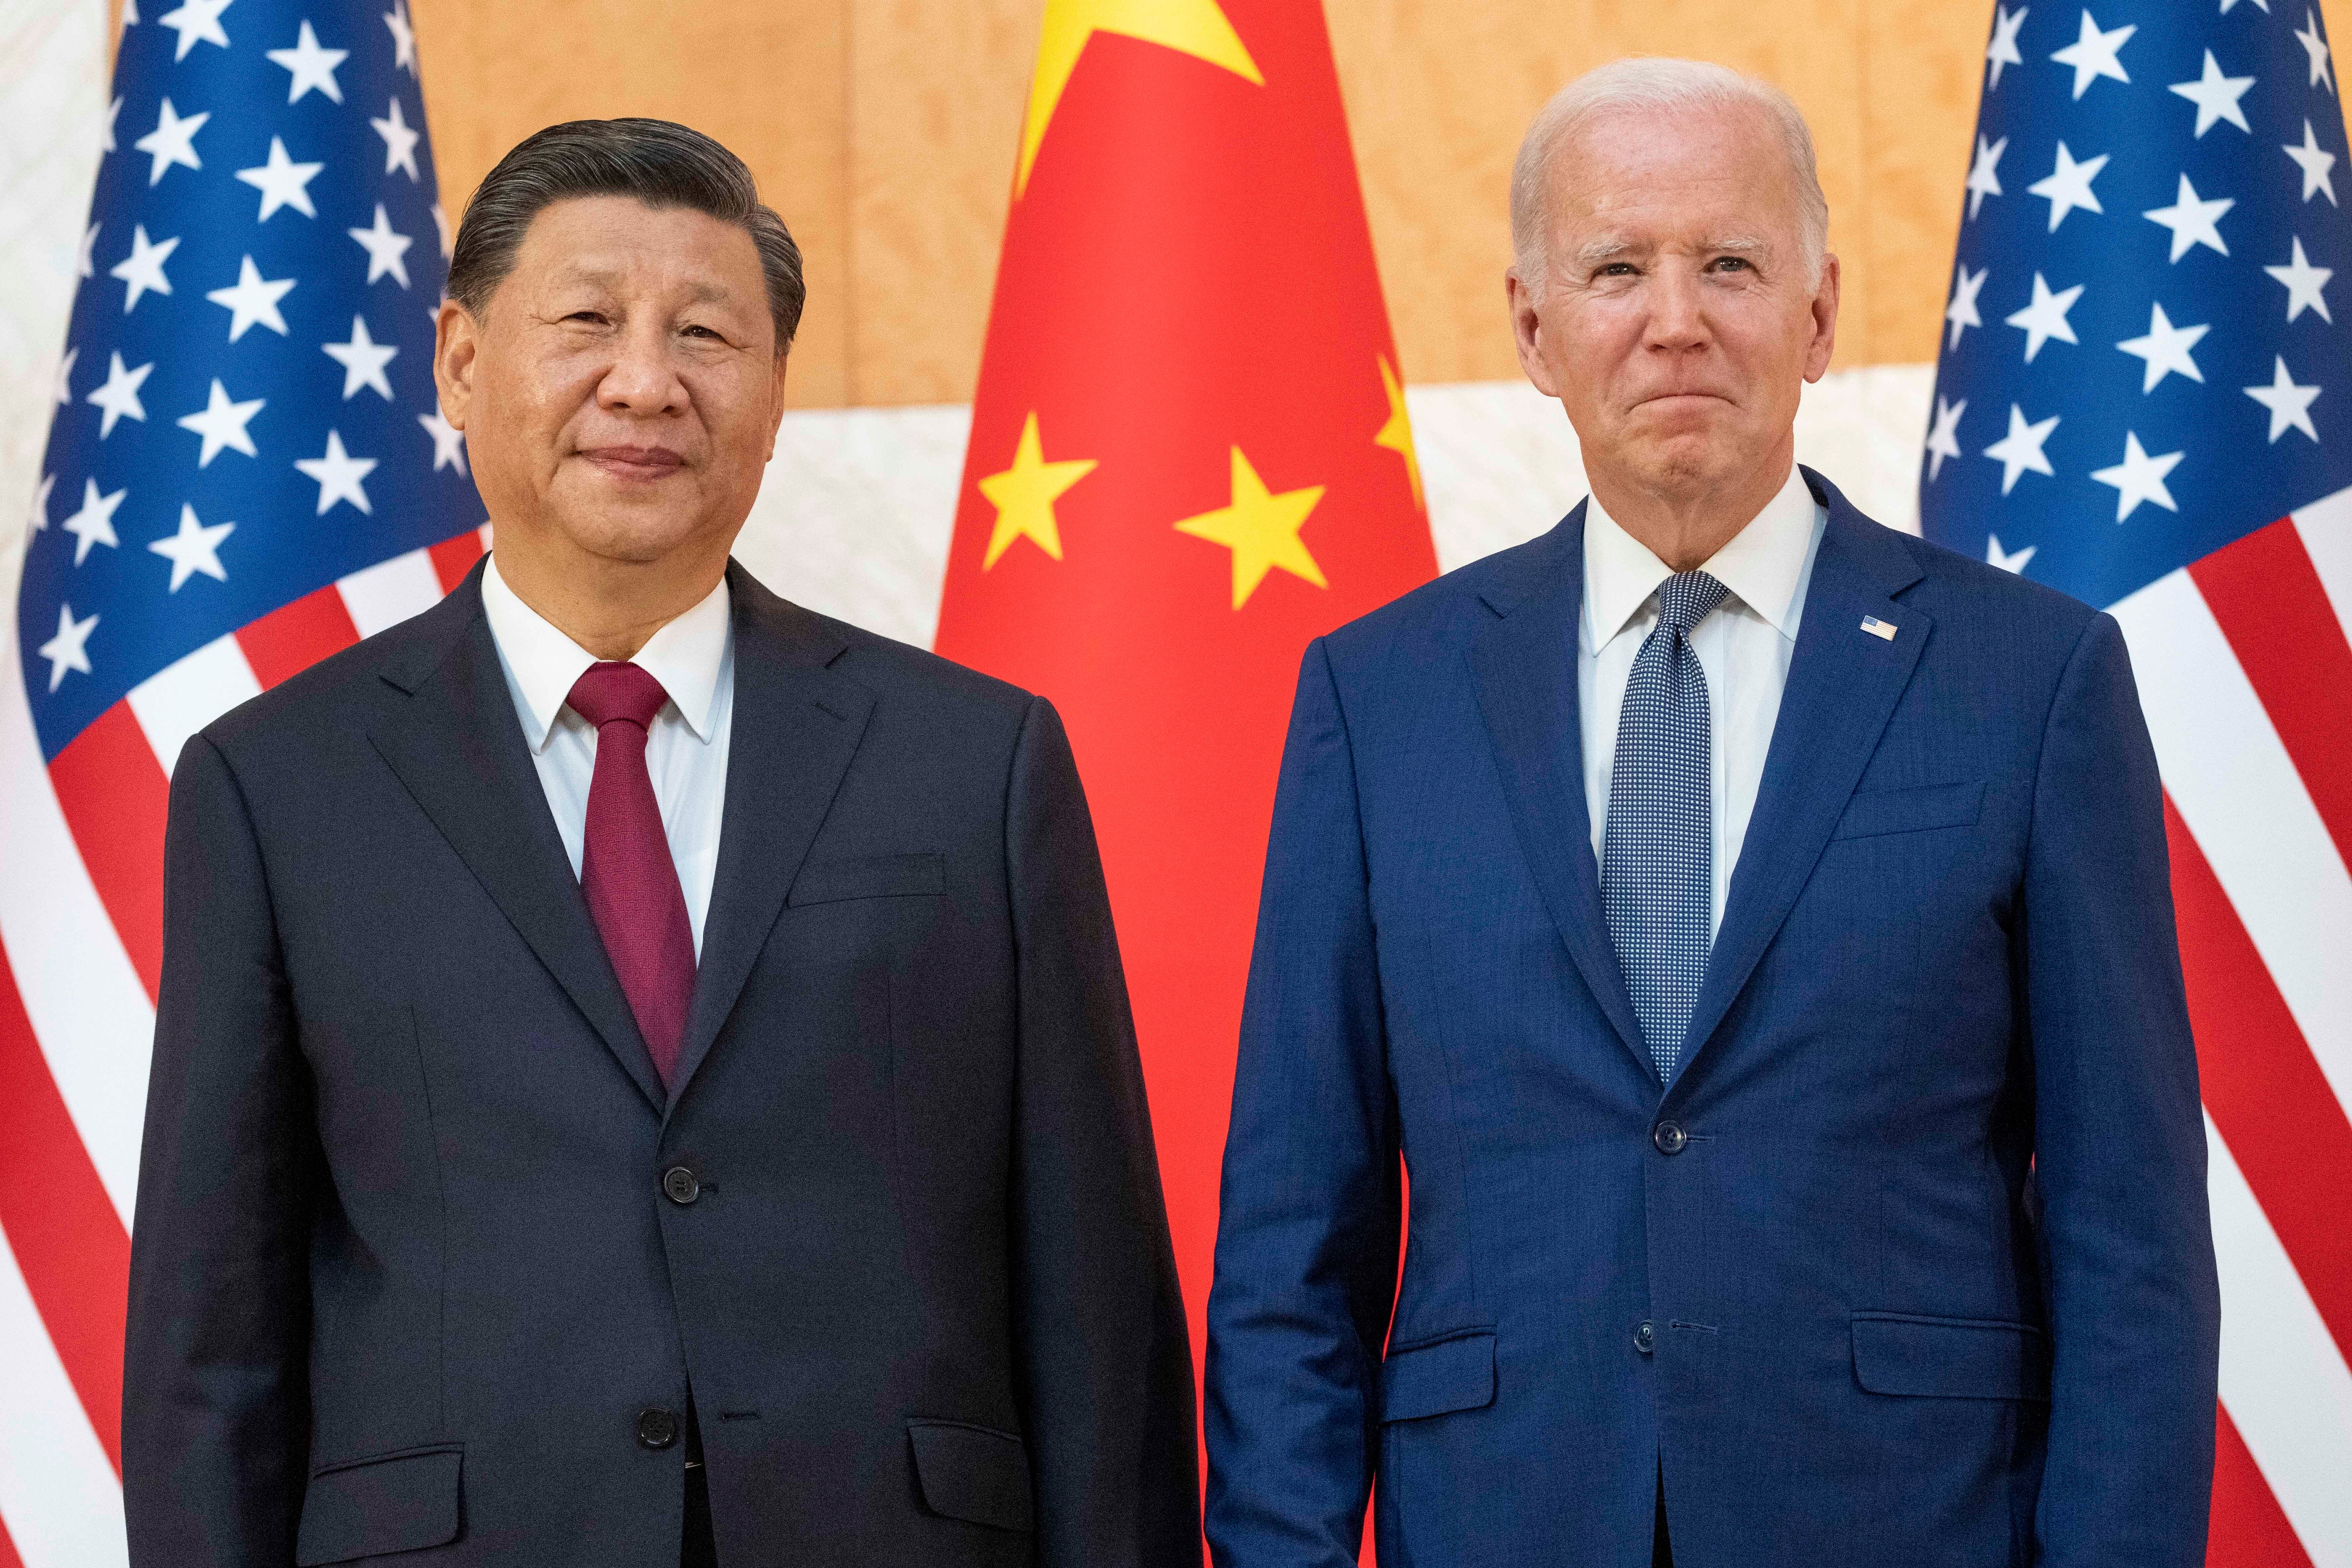 Joe Biden with Xi Jinping before a meeting on the sidelines of the G20 summit last year in Bali